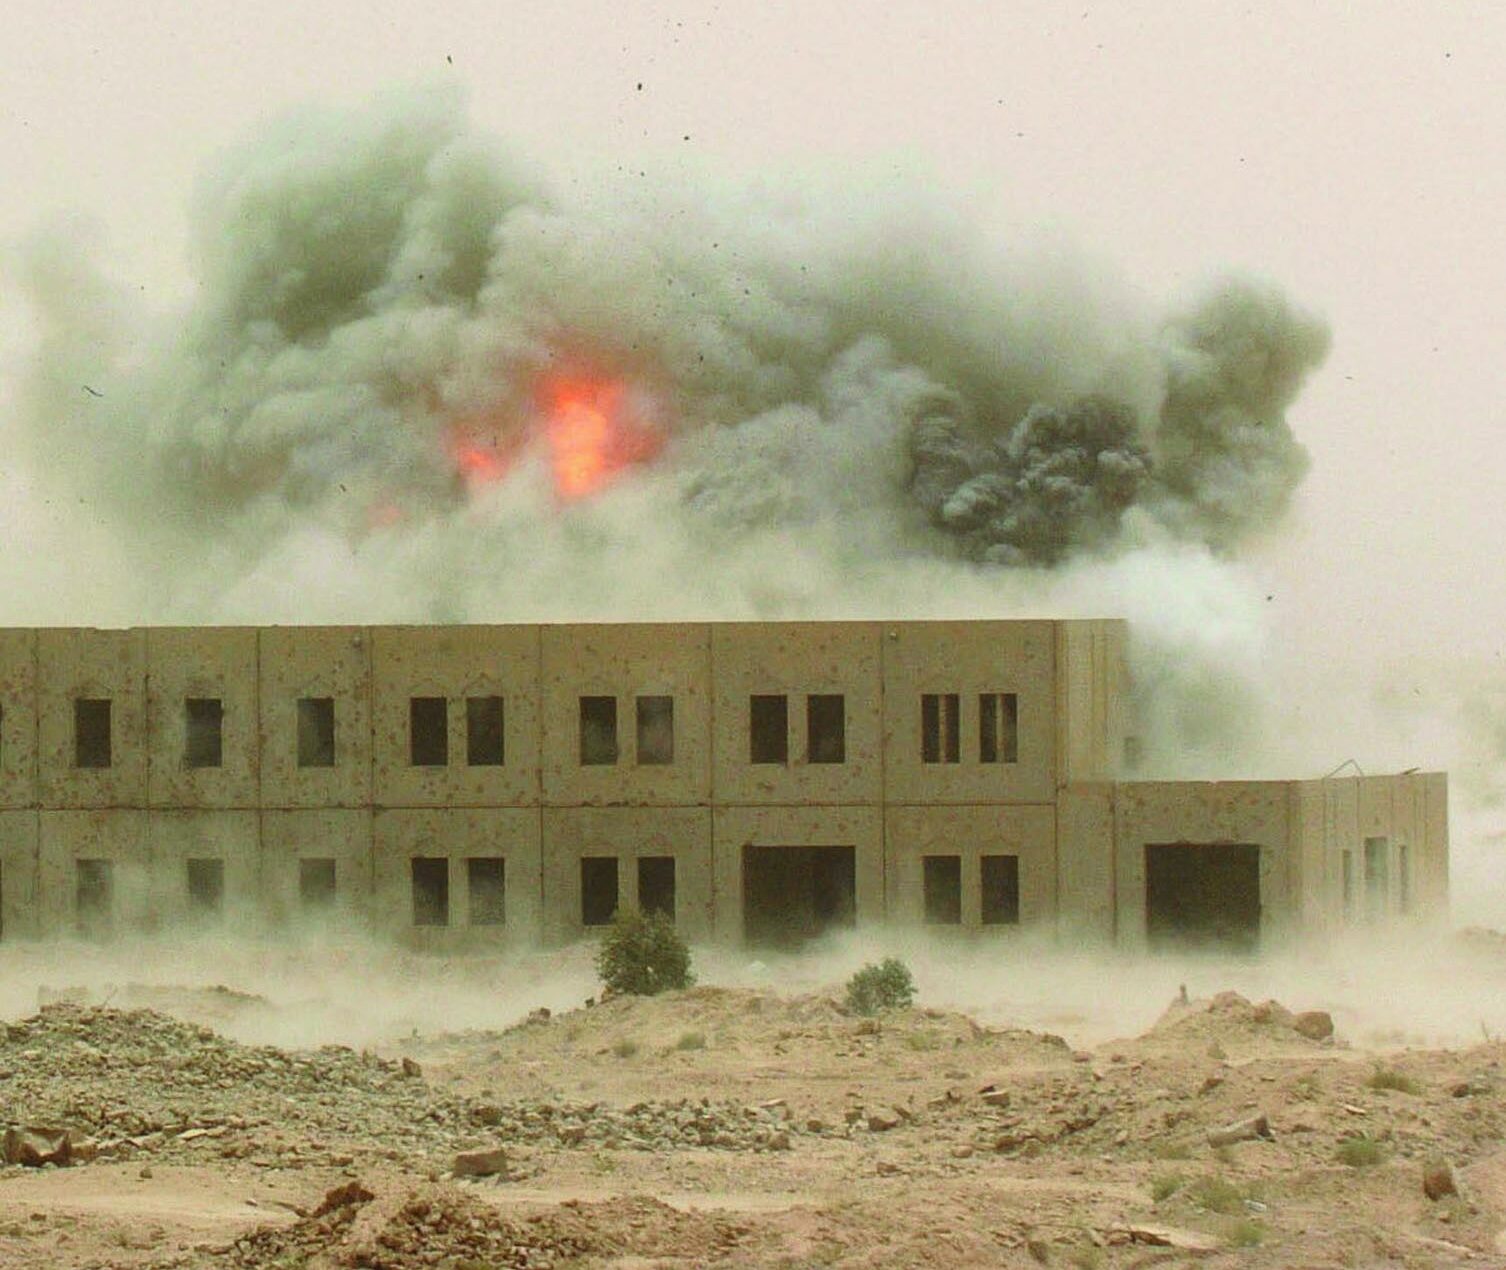 A fireball emerges from the smoky debris of a missile strike in Iraq on September 23, 2005.